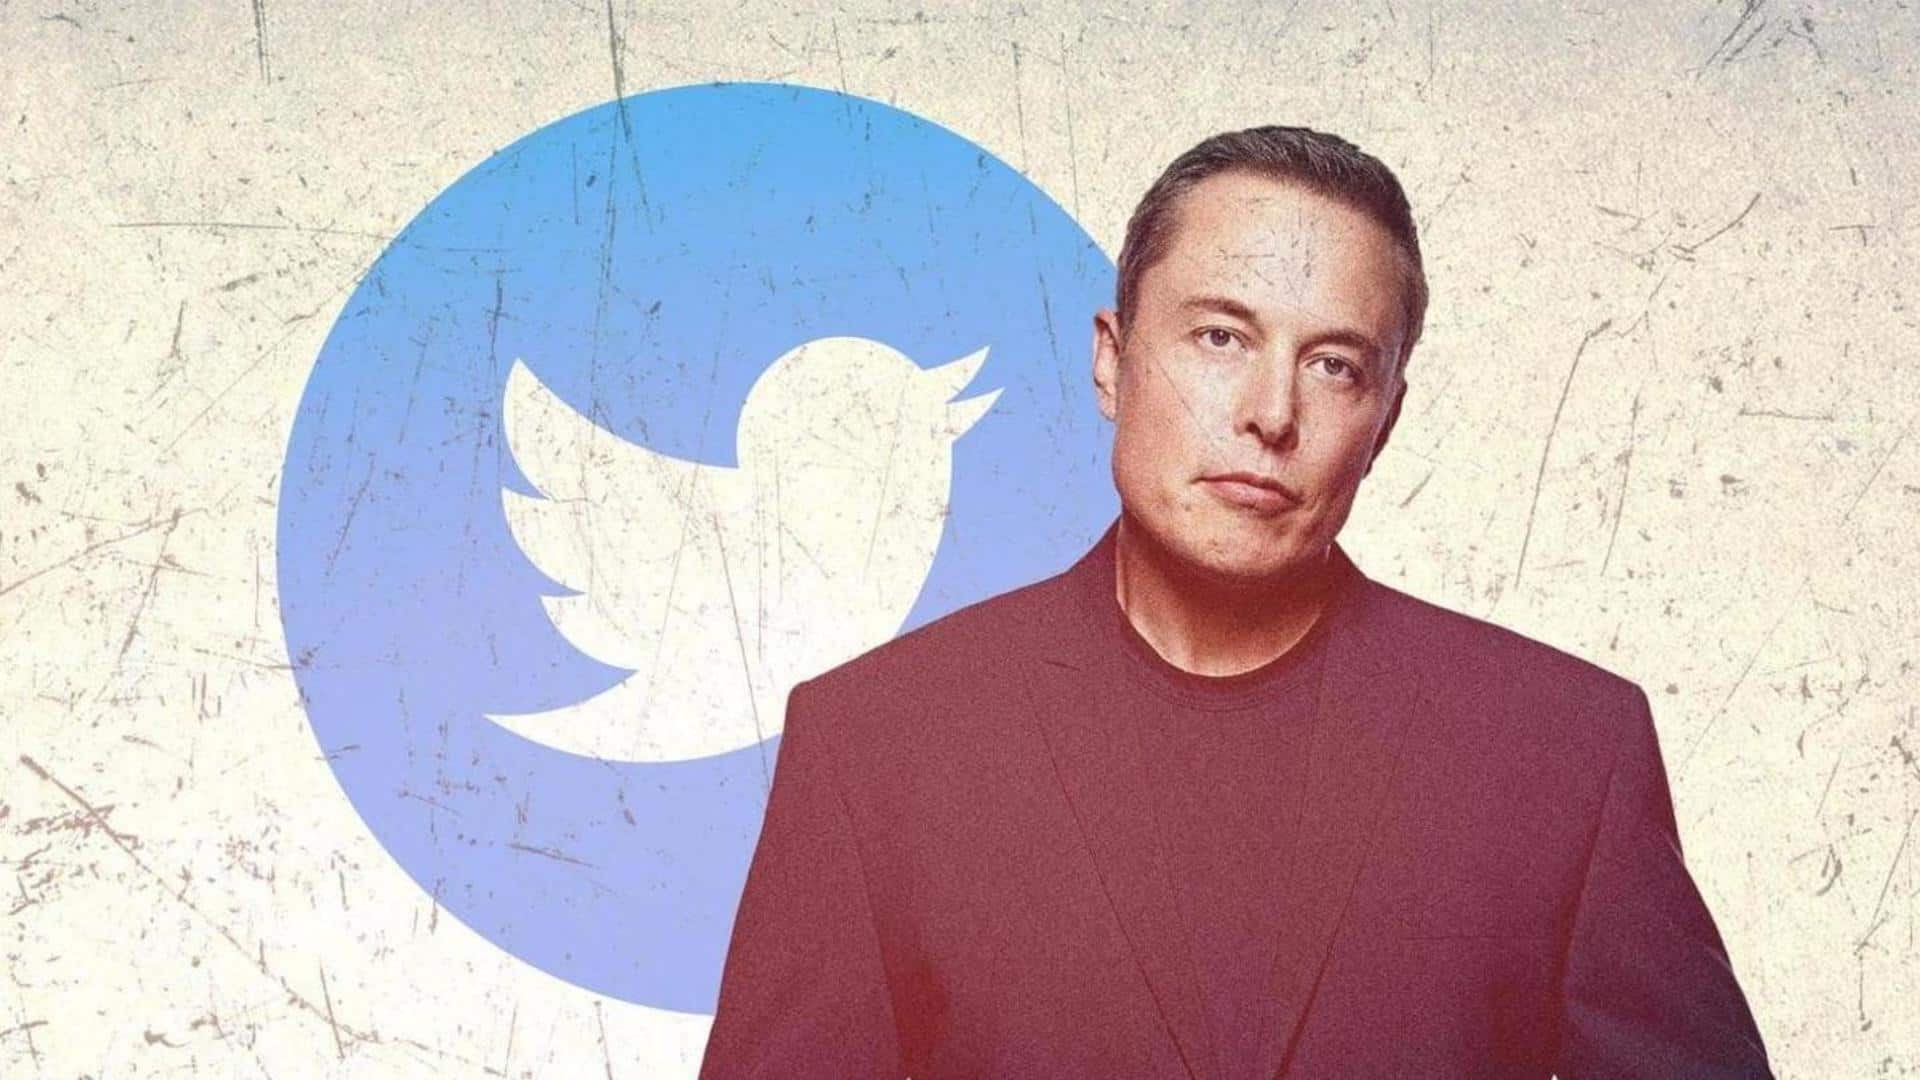 Musk offers equity grants to Twitter employees at $20bn valuation